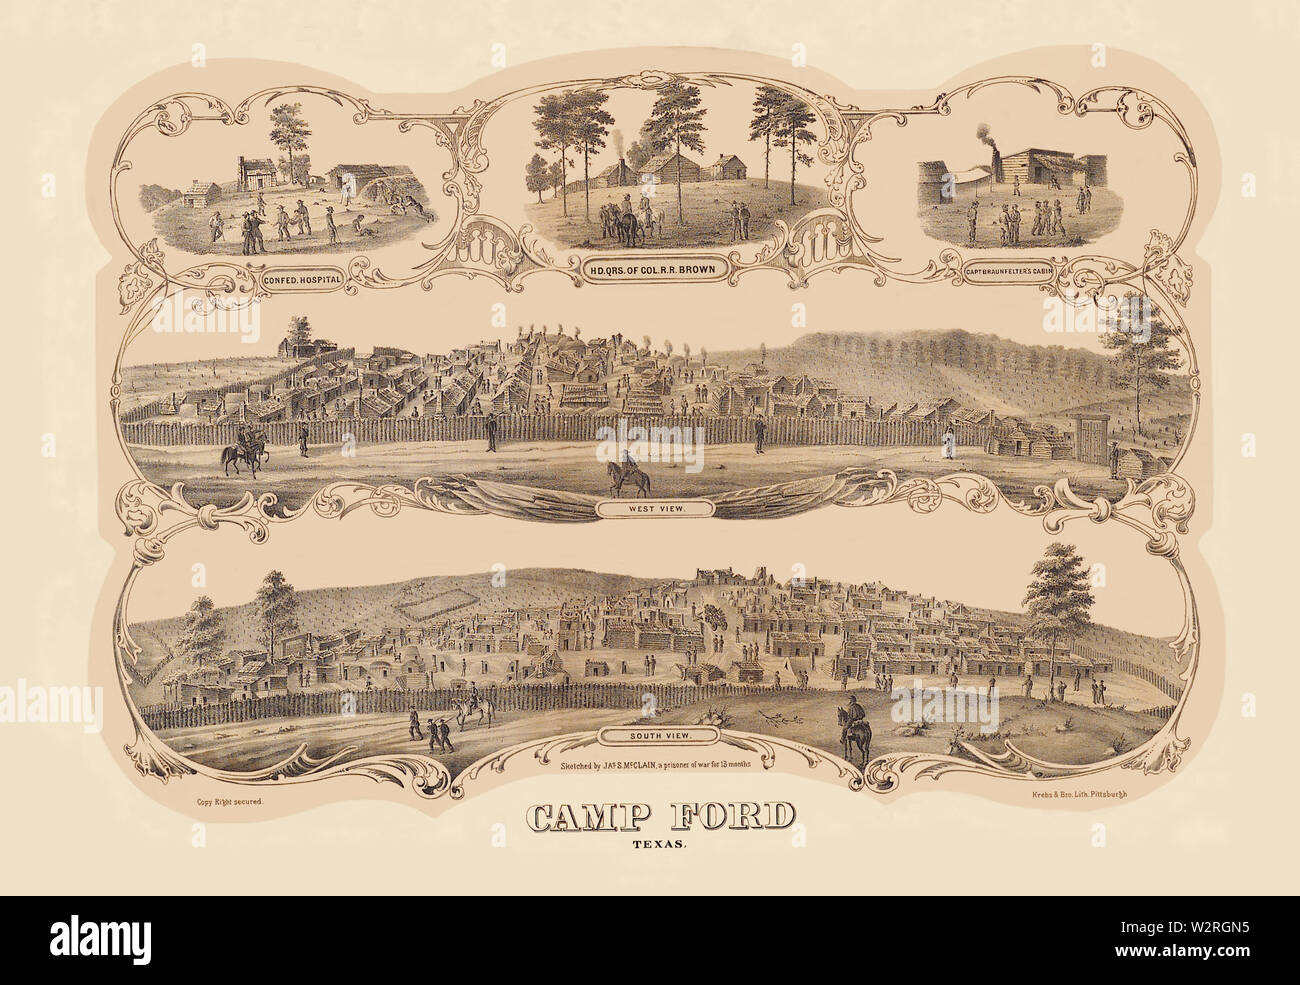 Wood cut engraving of the Camp Ford Prison Camp, Tyler, Texas.  Originally drawn by Corp. James S. McClain, F 120th Ohio, Infantry, captured on May 3, 1864, and held as a prisoner of war until the final exchange of prisoners on May 27, 1865.   The inserts show: left - the camp hospital located south of the prison; center - the headquarters of Col. Reuben R. Brown, 35th Texas Cavalry, who was in command of the camp from September 1864 until the war's end, and right - the cabin of Captain Elias Fraunfelter, Co. F, 120th Ohio, Captured on the Red River, May 3, 1864, exchanged May 27, 1865.   Note Stock Photo